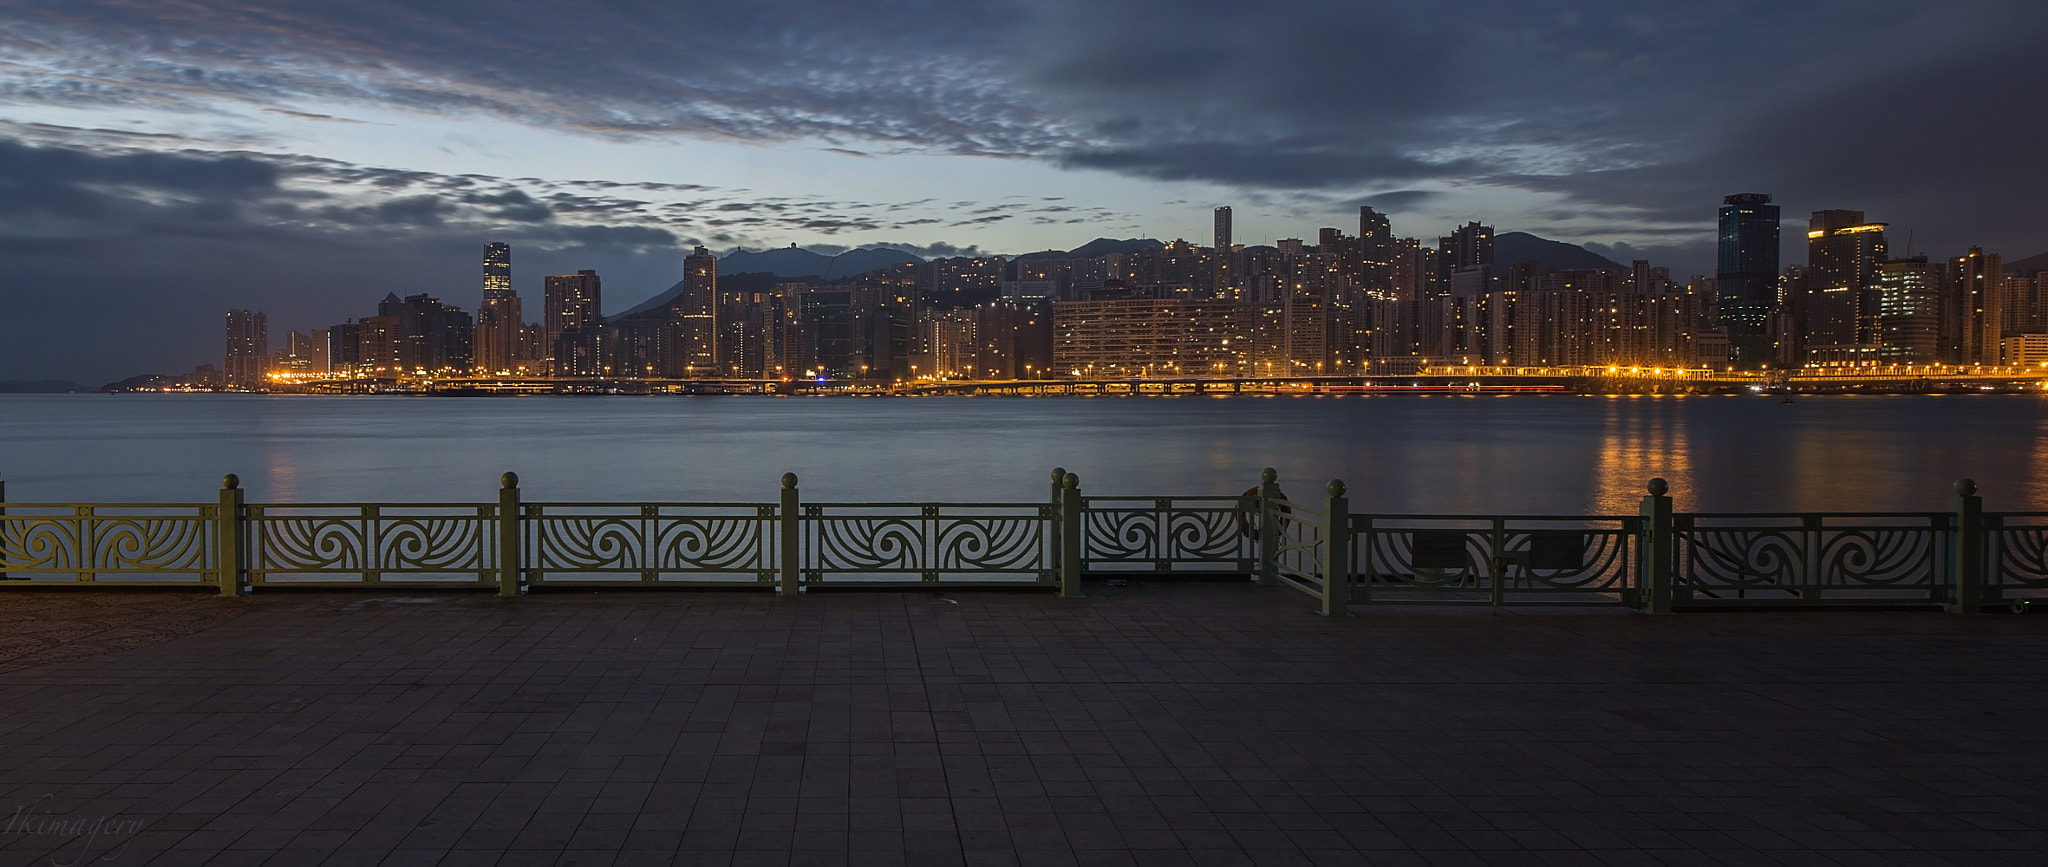 Nikon D4 sample photo. The end hk from kowloon photography